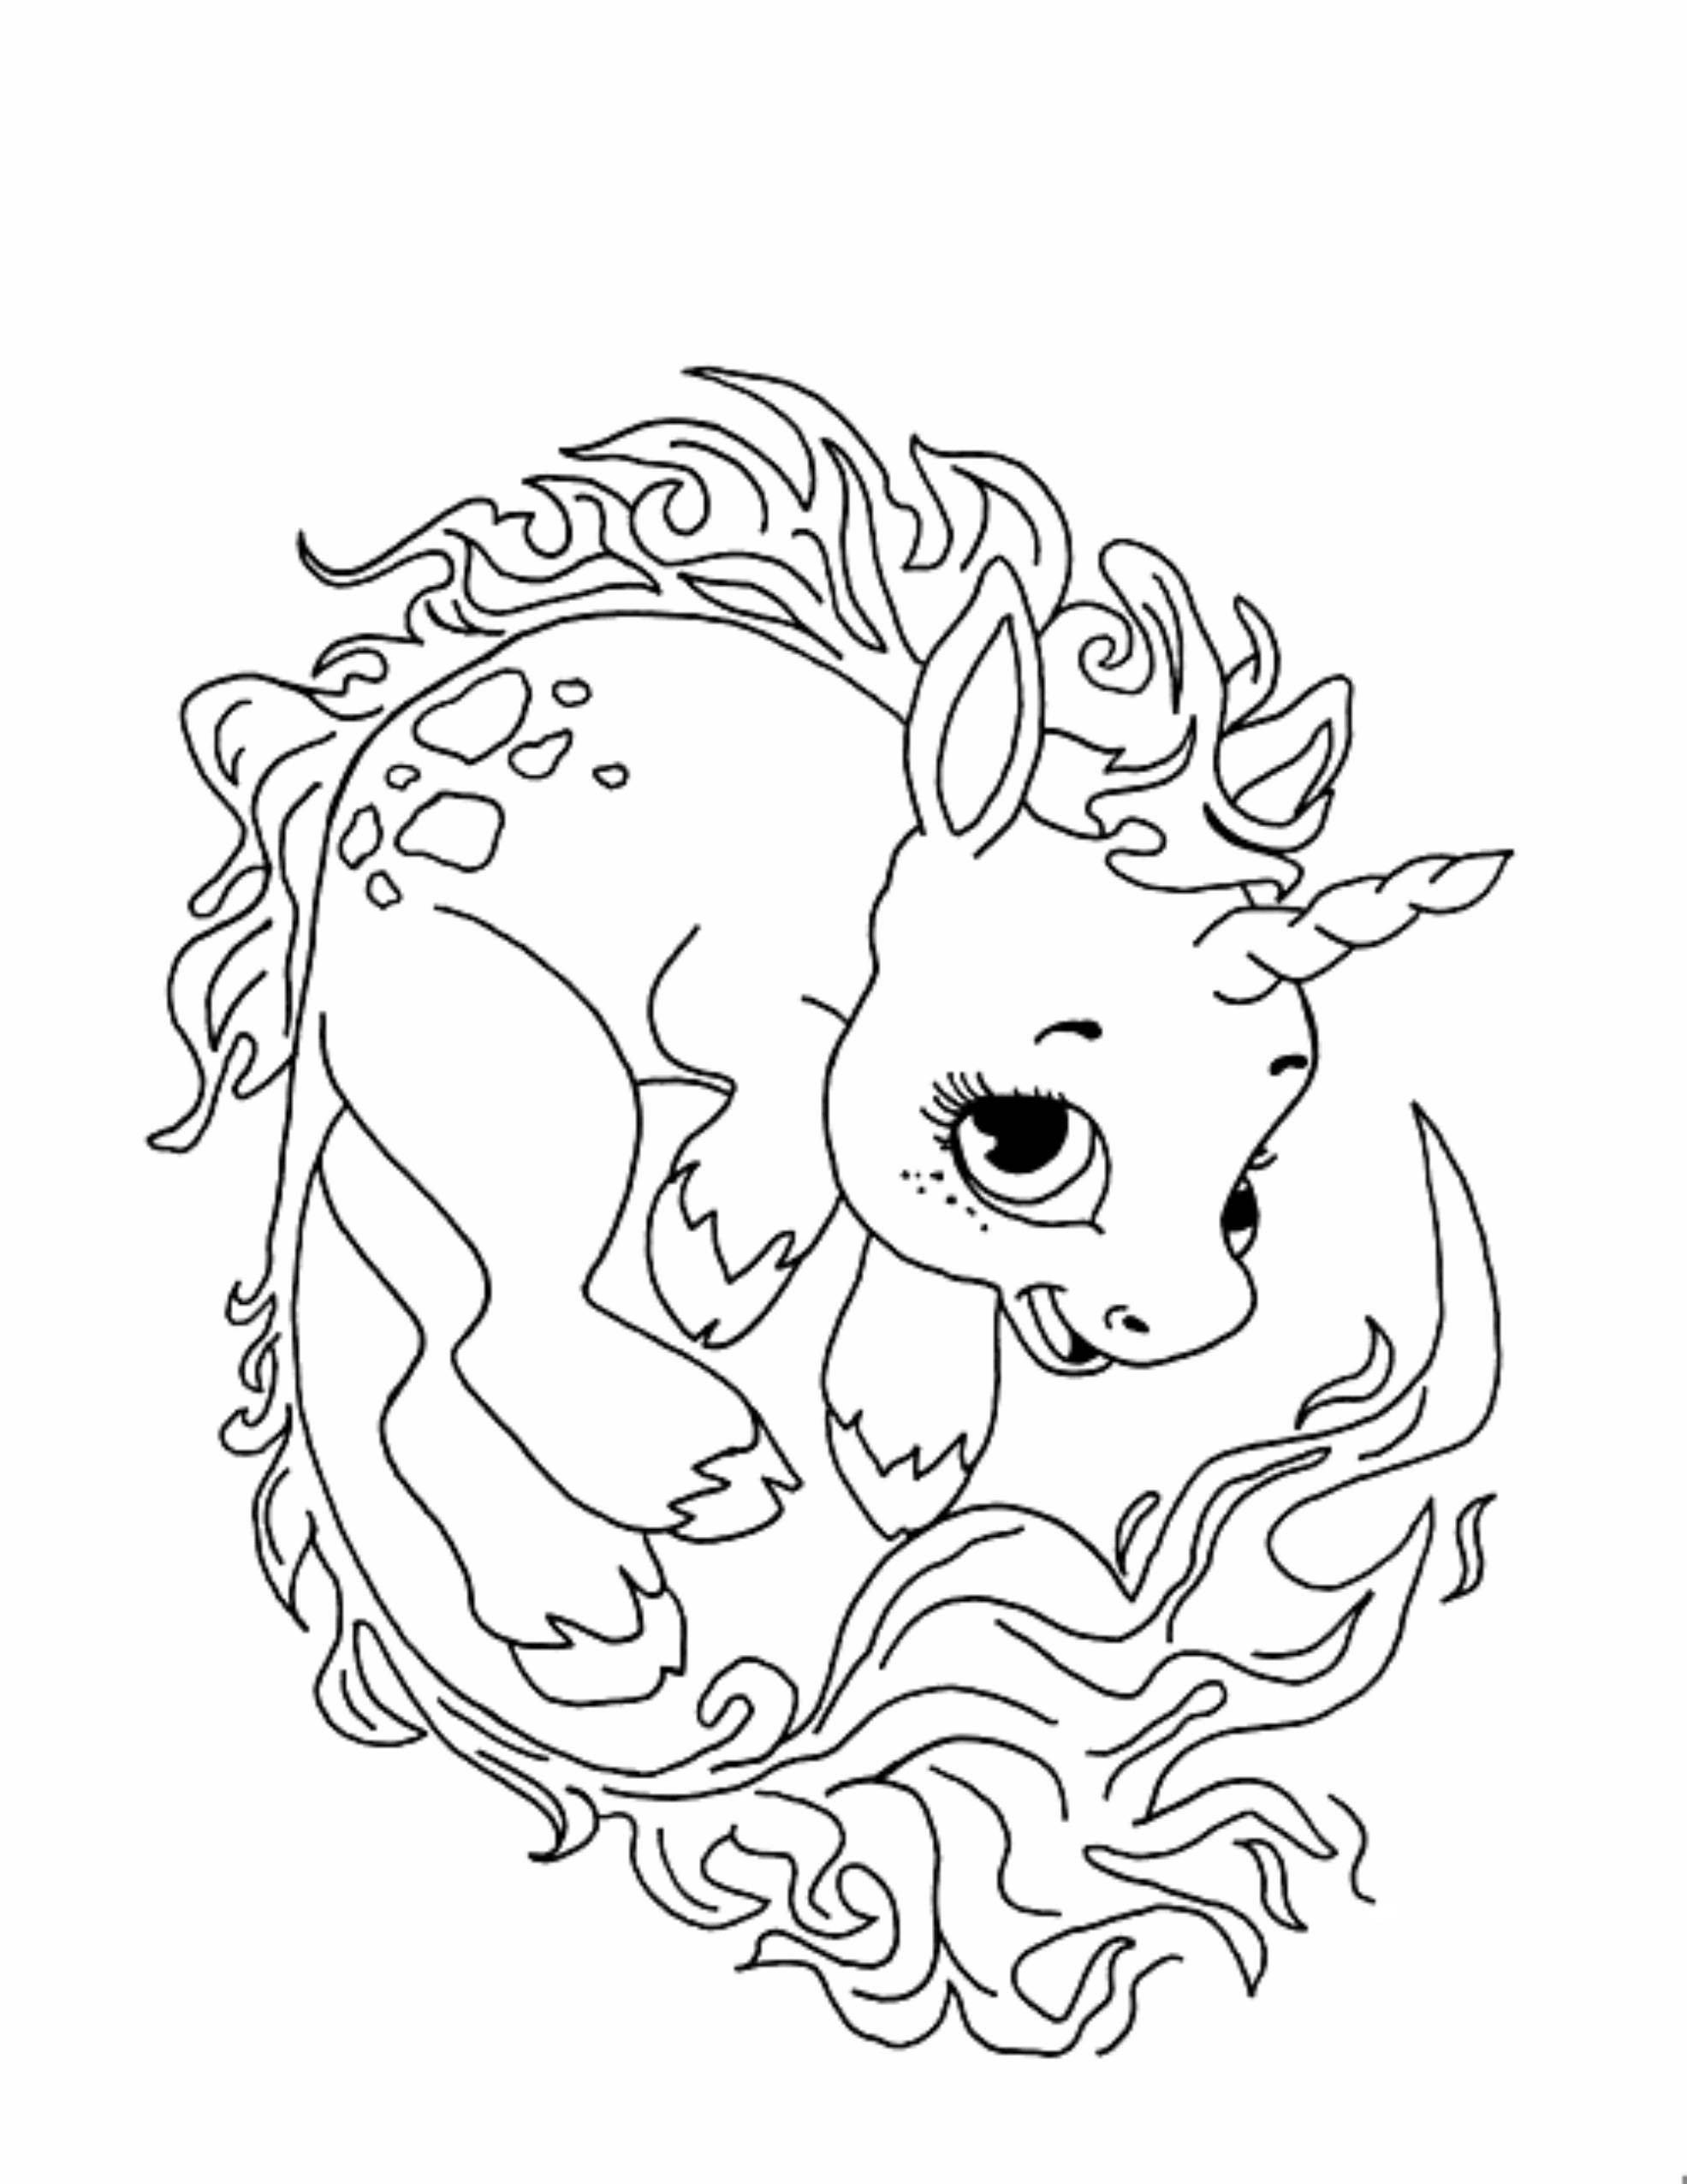 Coloring Pages Of Baby Unicorns Wallpaper